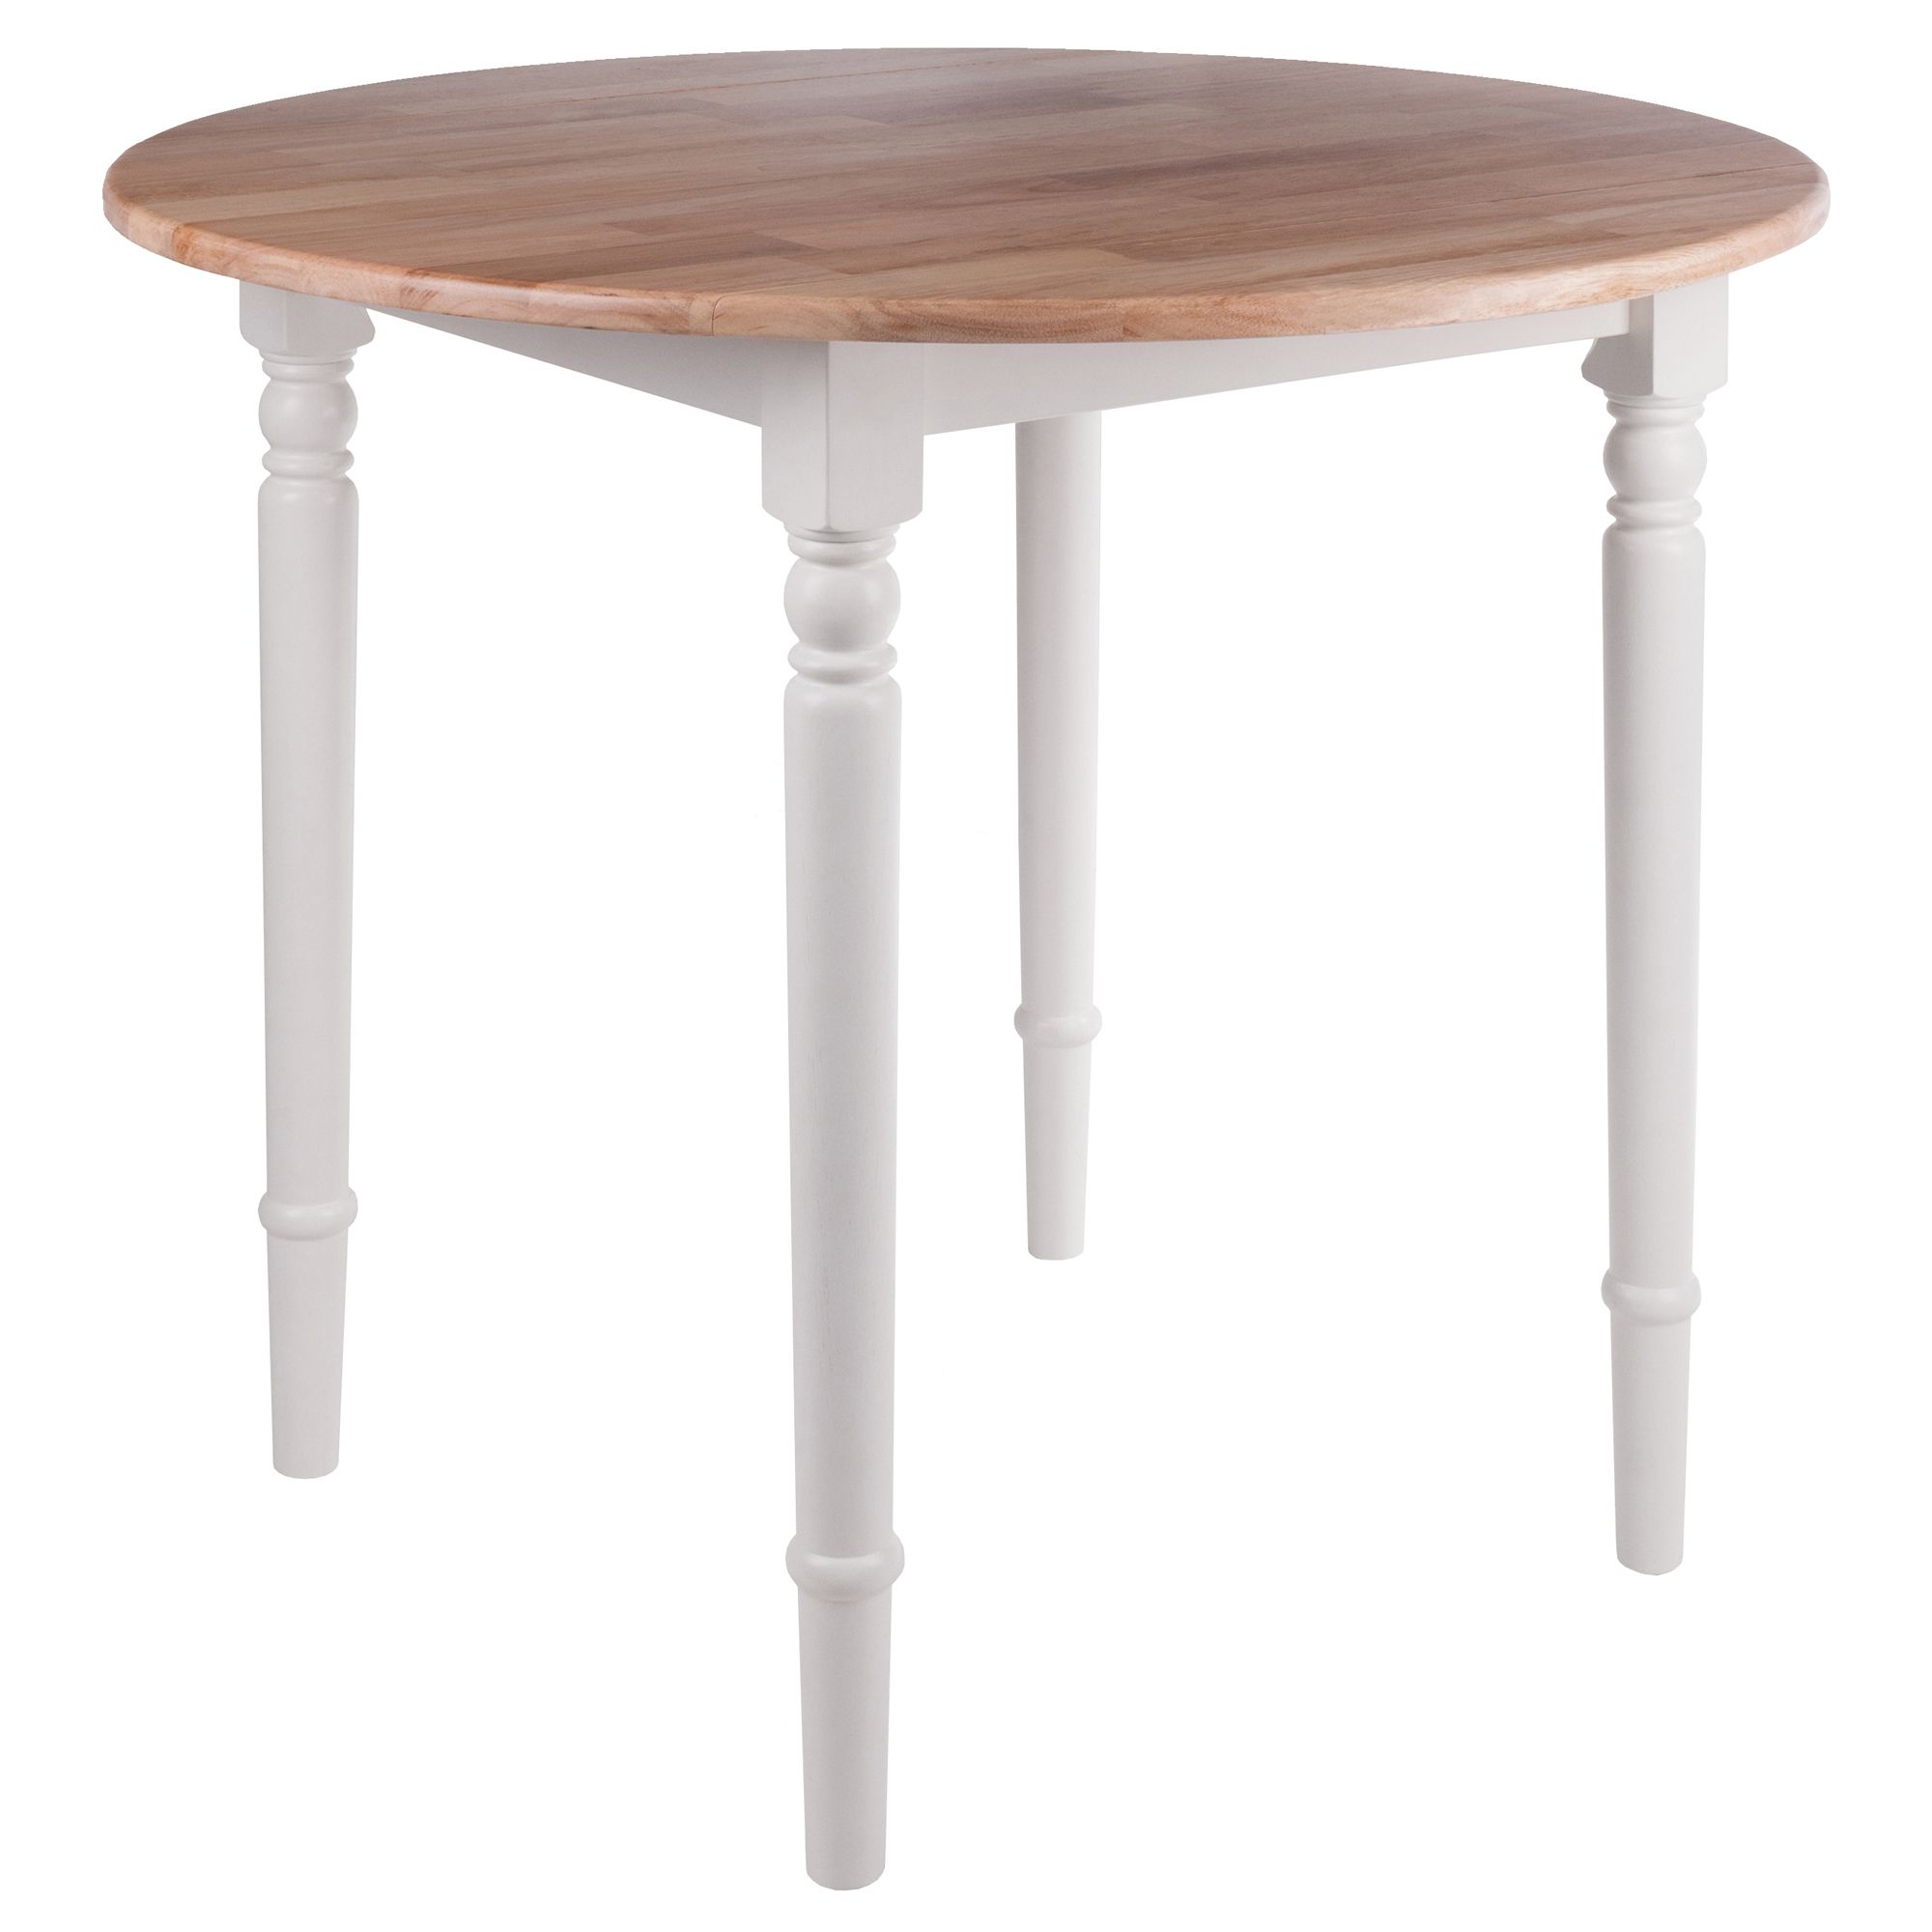 Winsome Wood Sorella Round Drop Leaf Table, Natural & White – Walmart In Leaf Round Console Tables (View 16 of 20)